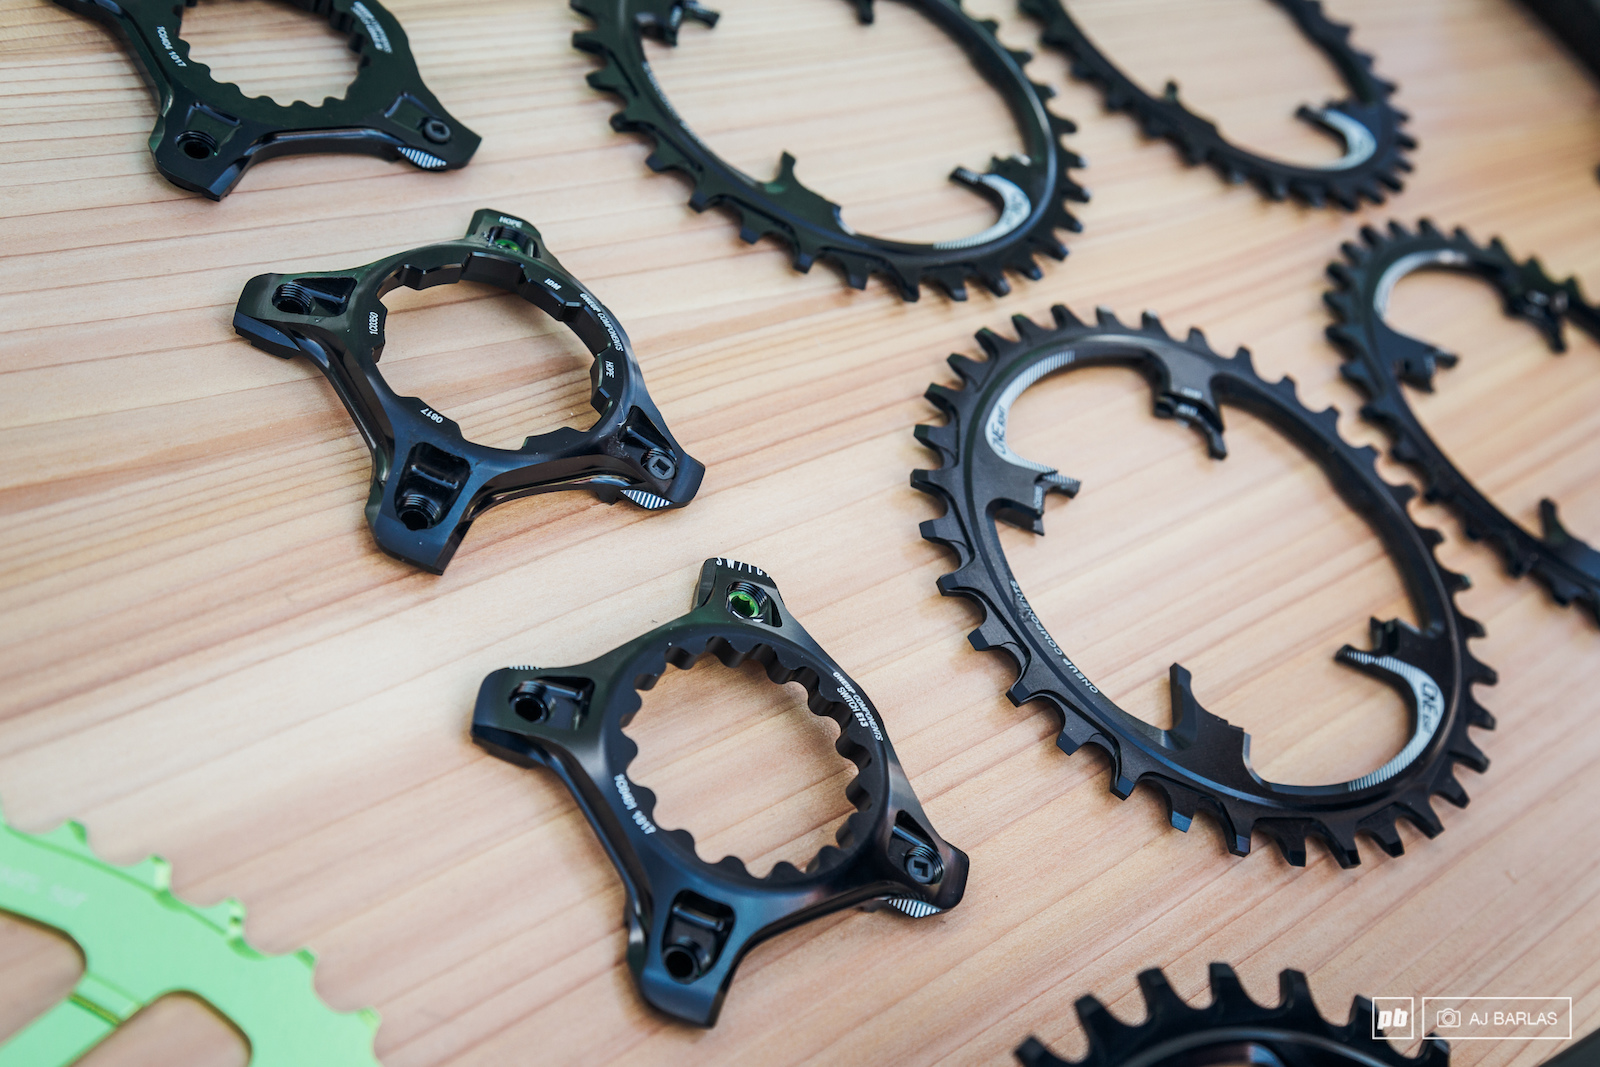 OneUp covers a wide range of the direct mount chainrings available, with SRAM, Hope, Race Face, e*thirtheen and Cannondale.